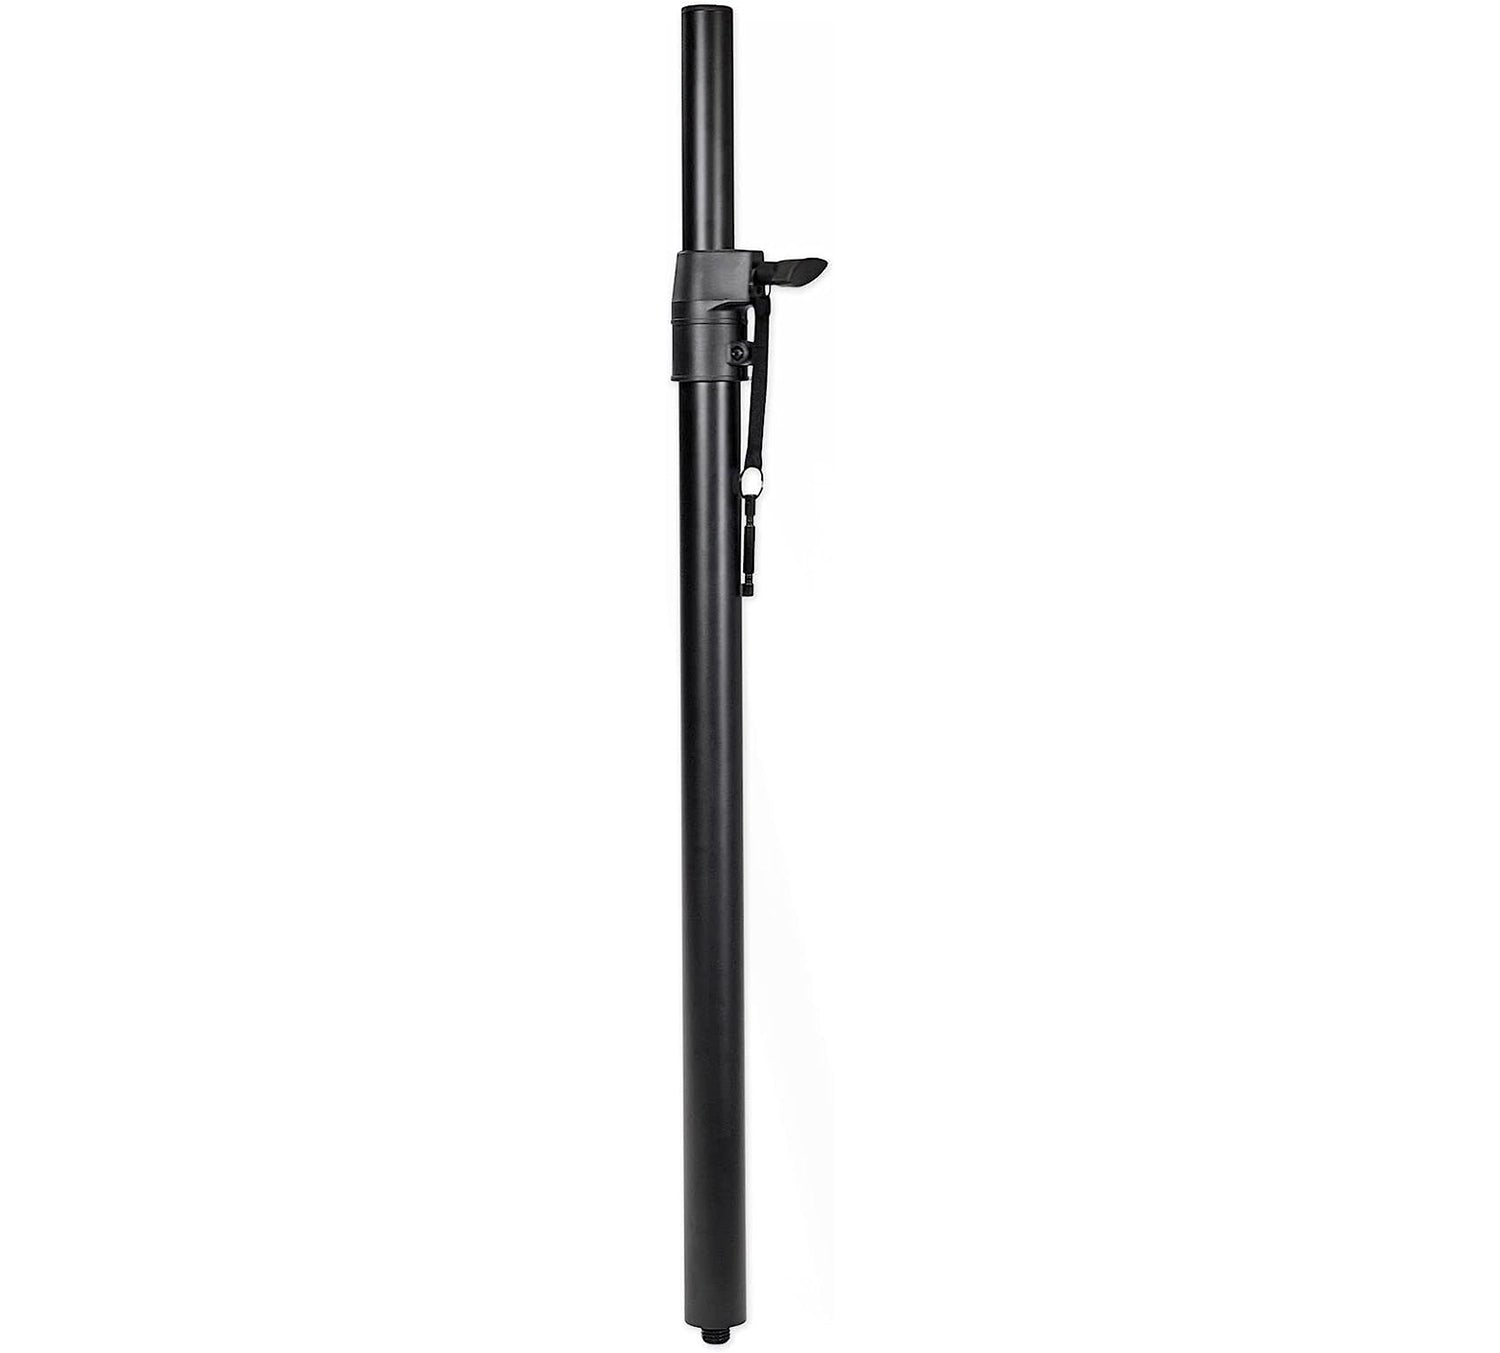 B-Stock: Mackie SPM400 Adjustable Speaker Pole for DRM Series Subwoofers by Mackie